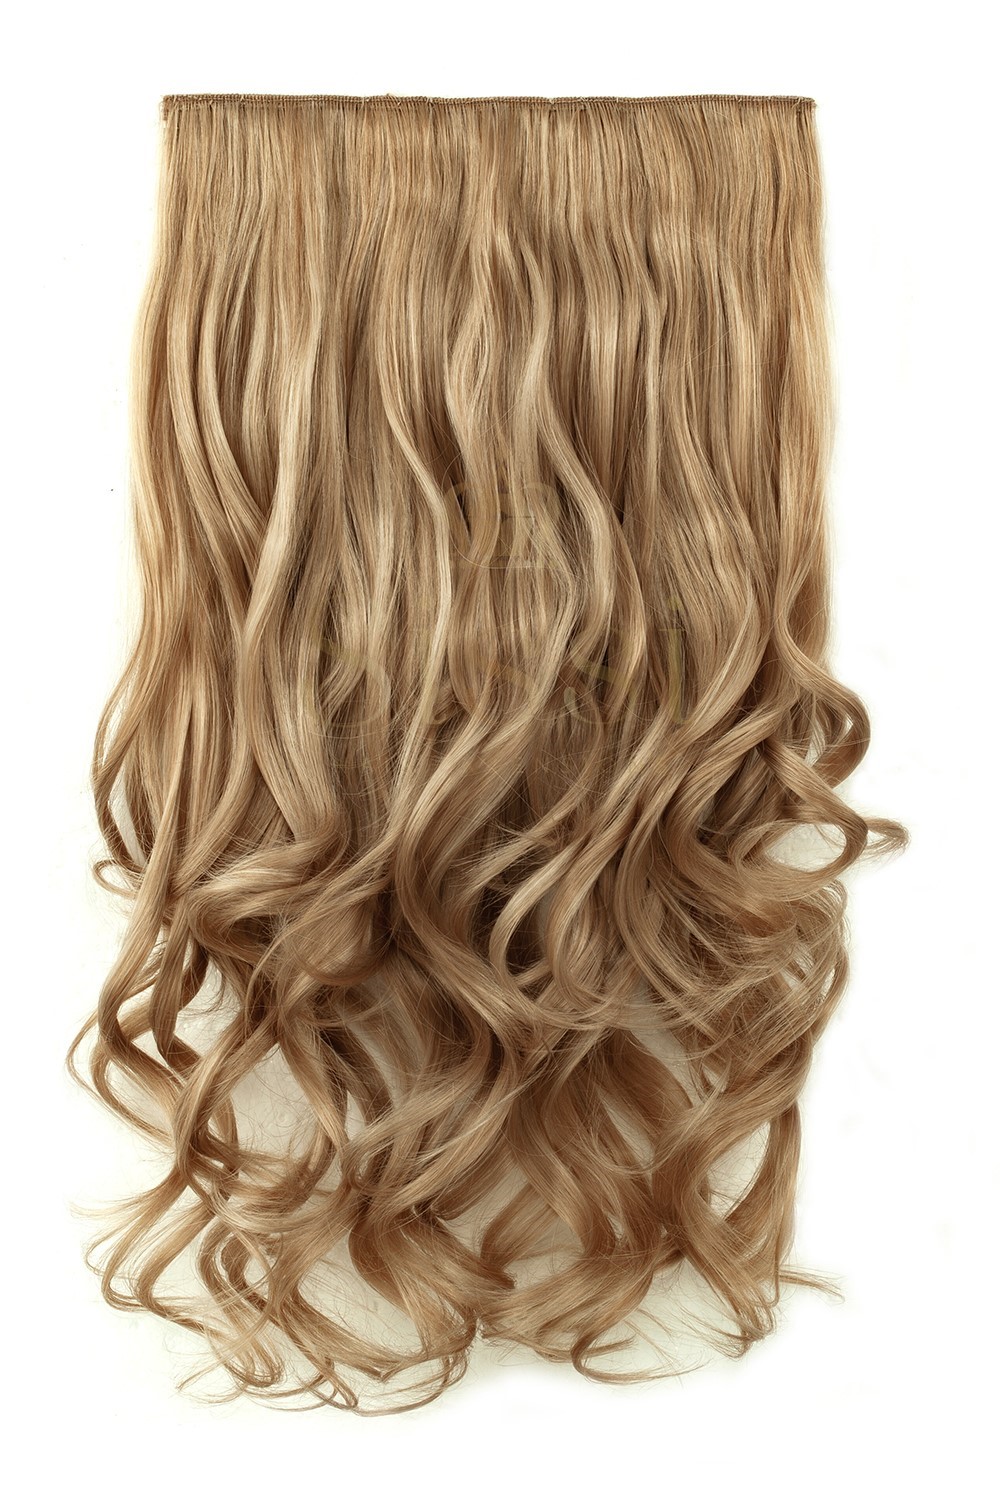 Deluxe Chloe（Highlight) 20" 1 Piece Curly Clip In Hair Extension  